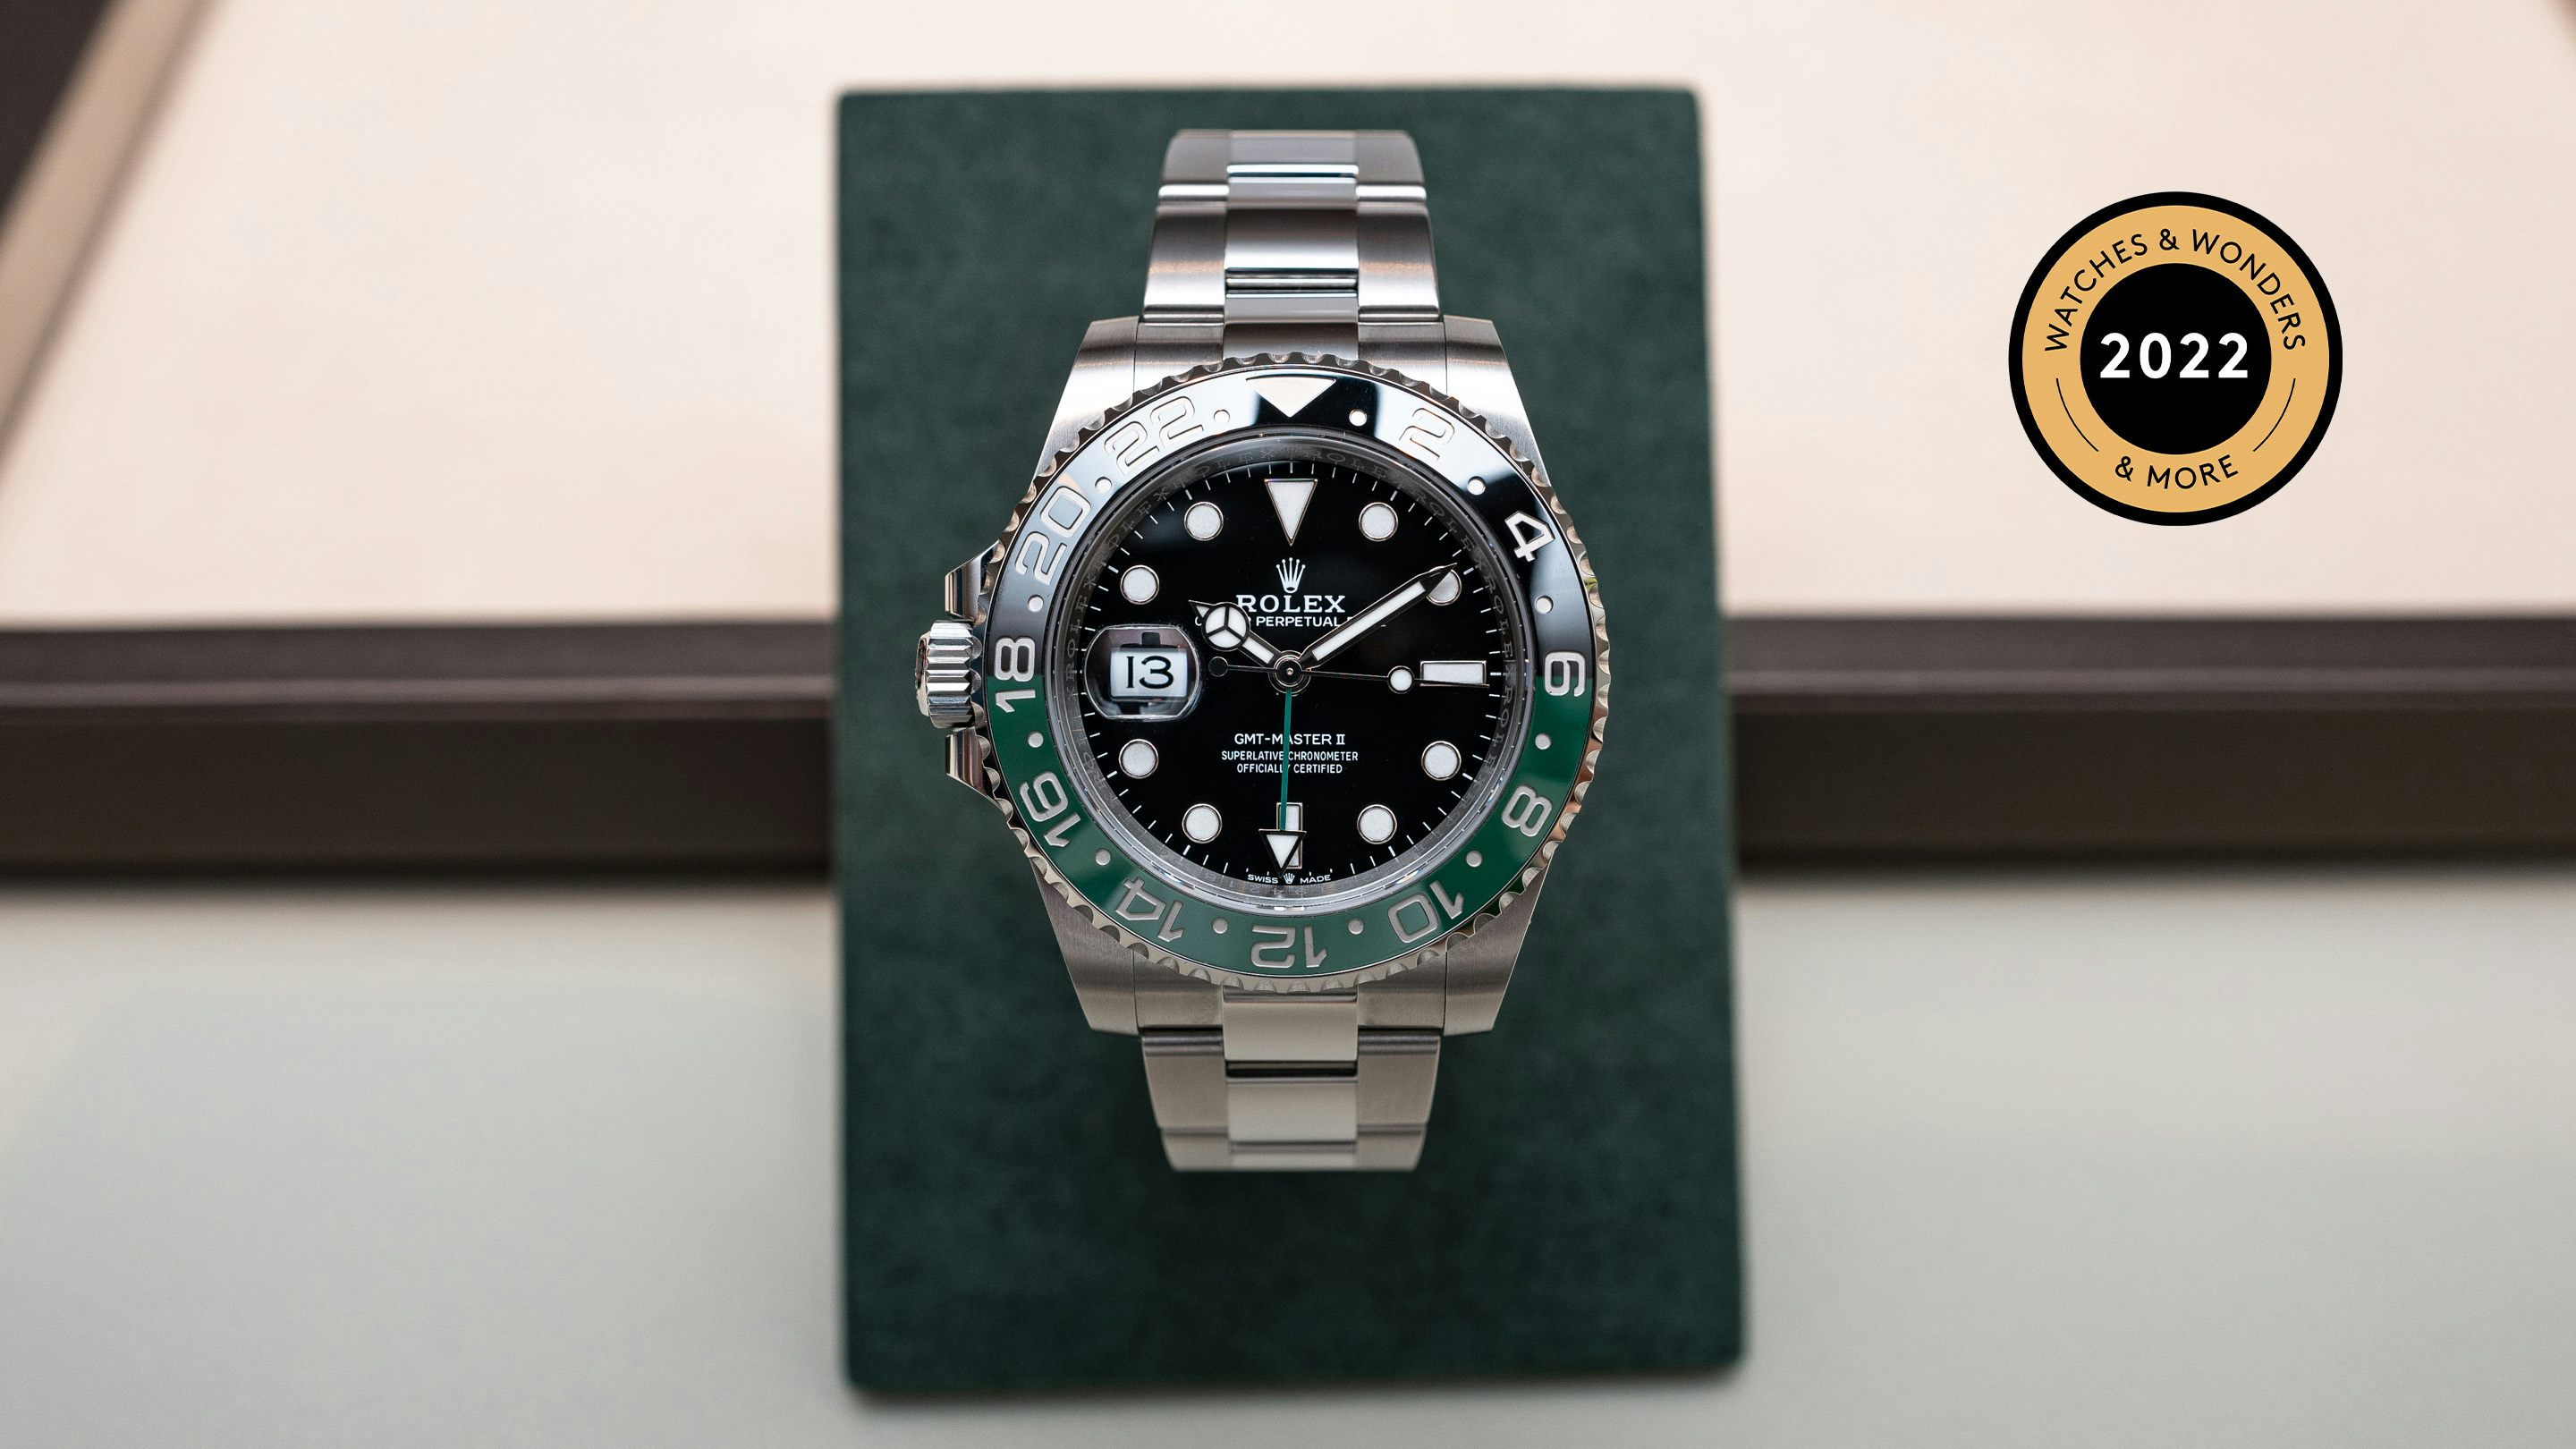 Southpaw Rolex: The New Left-Handed GMT Gets It Right